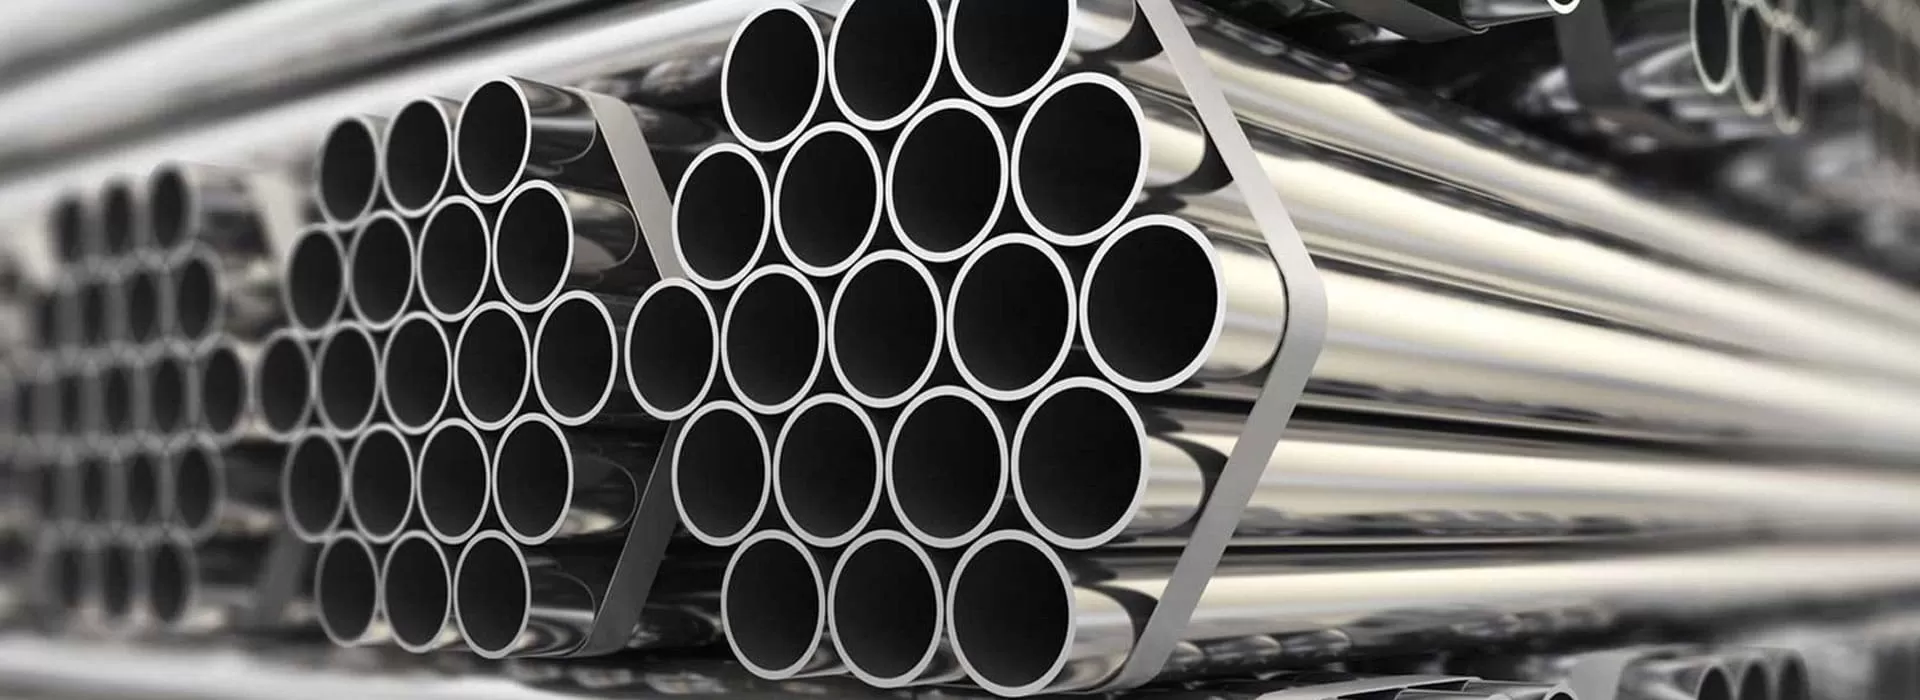 pipes suppliers stock